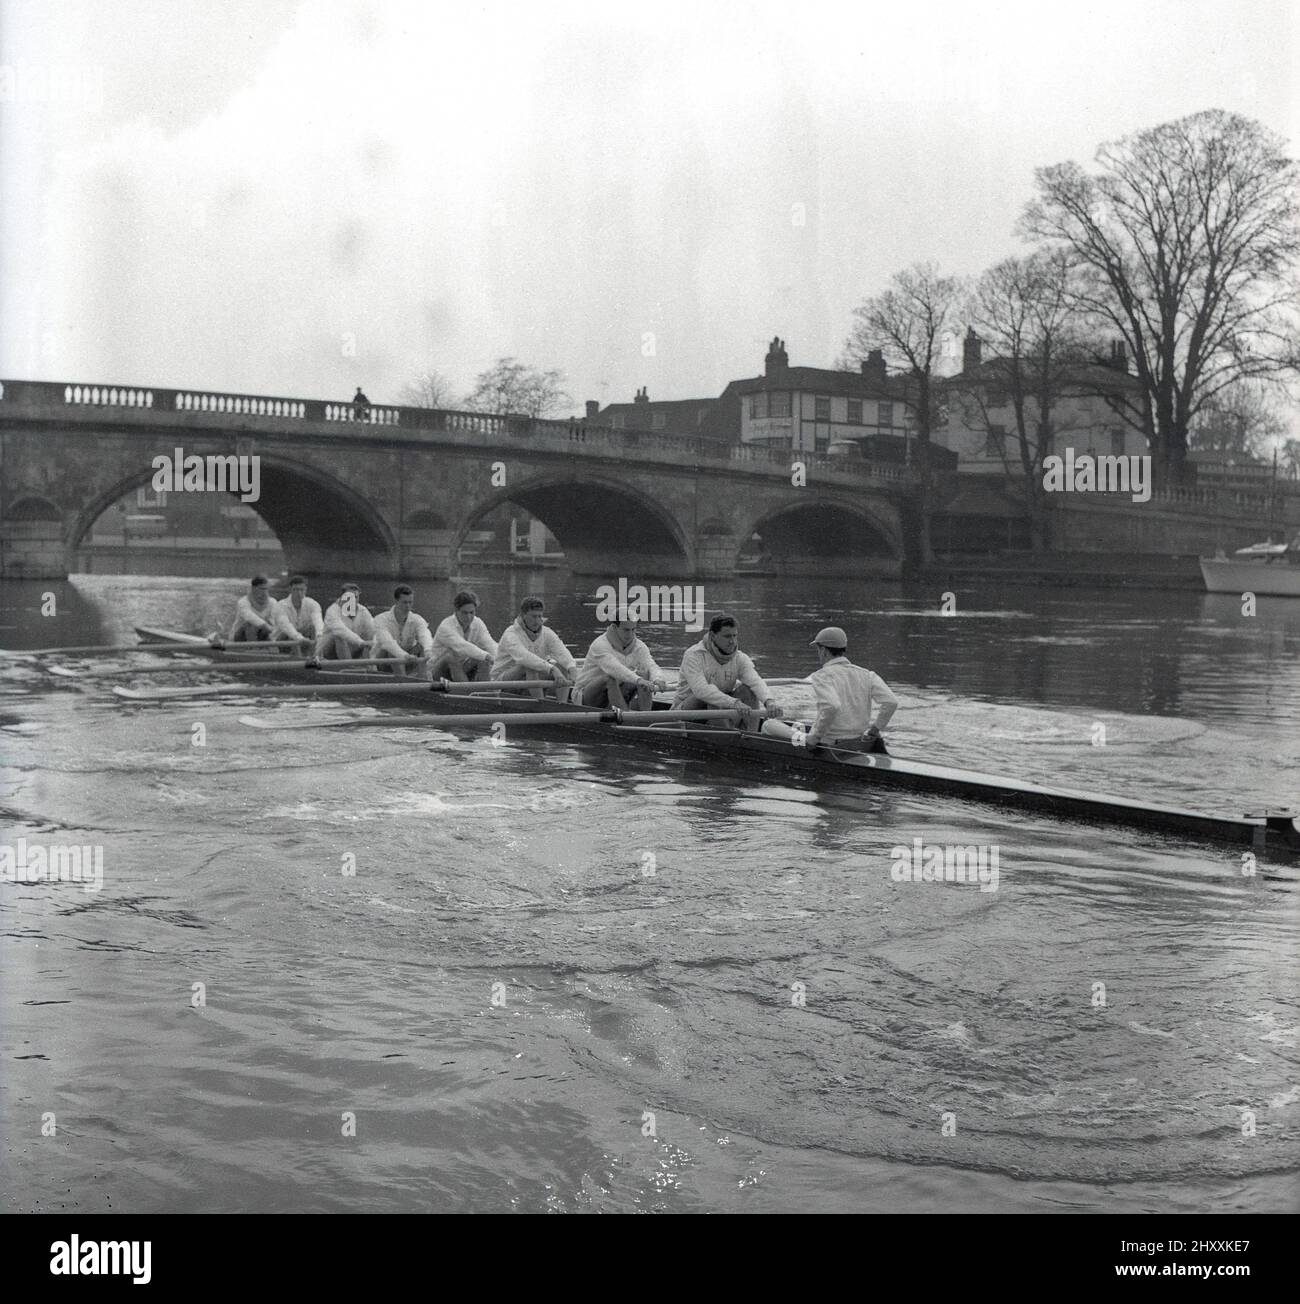 1961, historical, the crew of Cambridge University Boat club on the river Thames at Henley-in-Thames, Berkshire, England, UK, in training for the upcoming Oxford and Cambridge Boat Race, England, UK. This famous university rowing race, began in 1829, is a annual event on theThames over the championship course between Putney and Barnes in South West London. Stock Photo